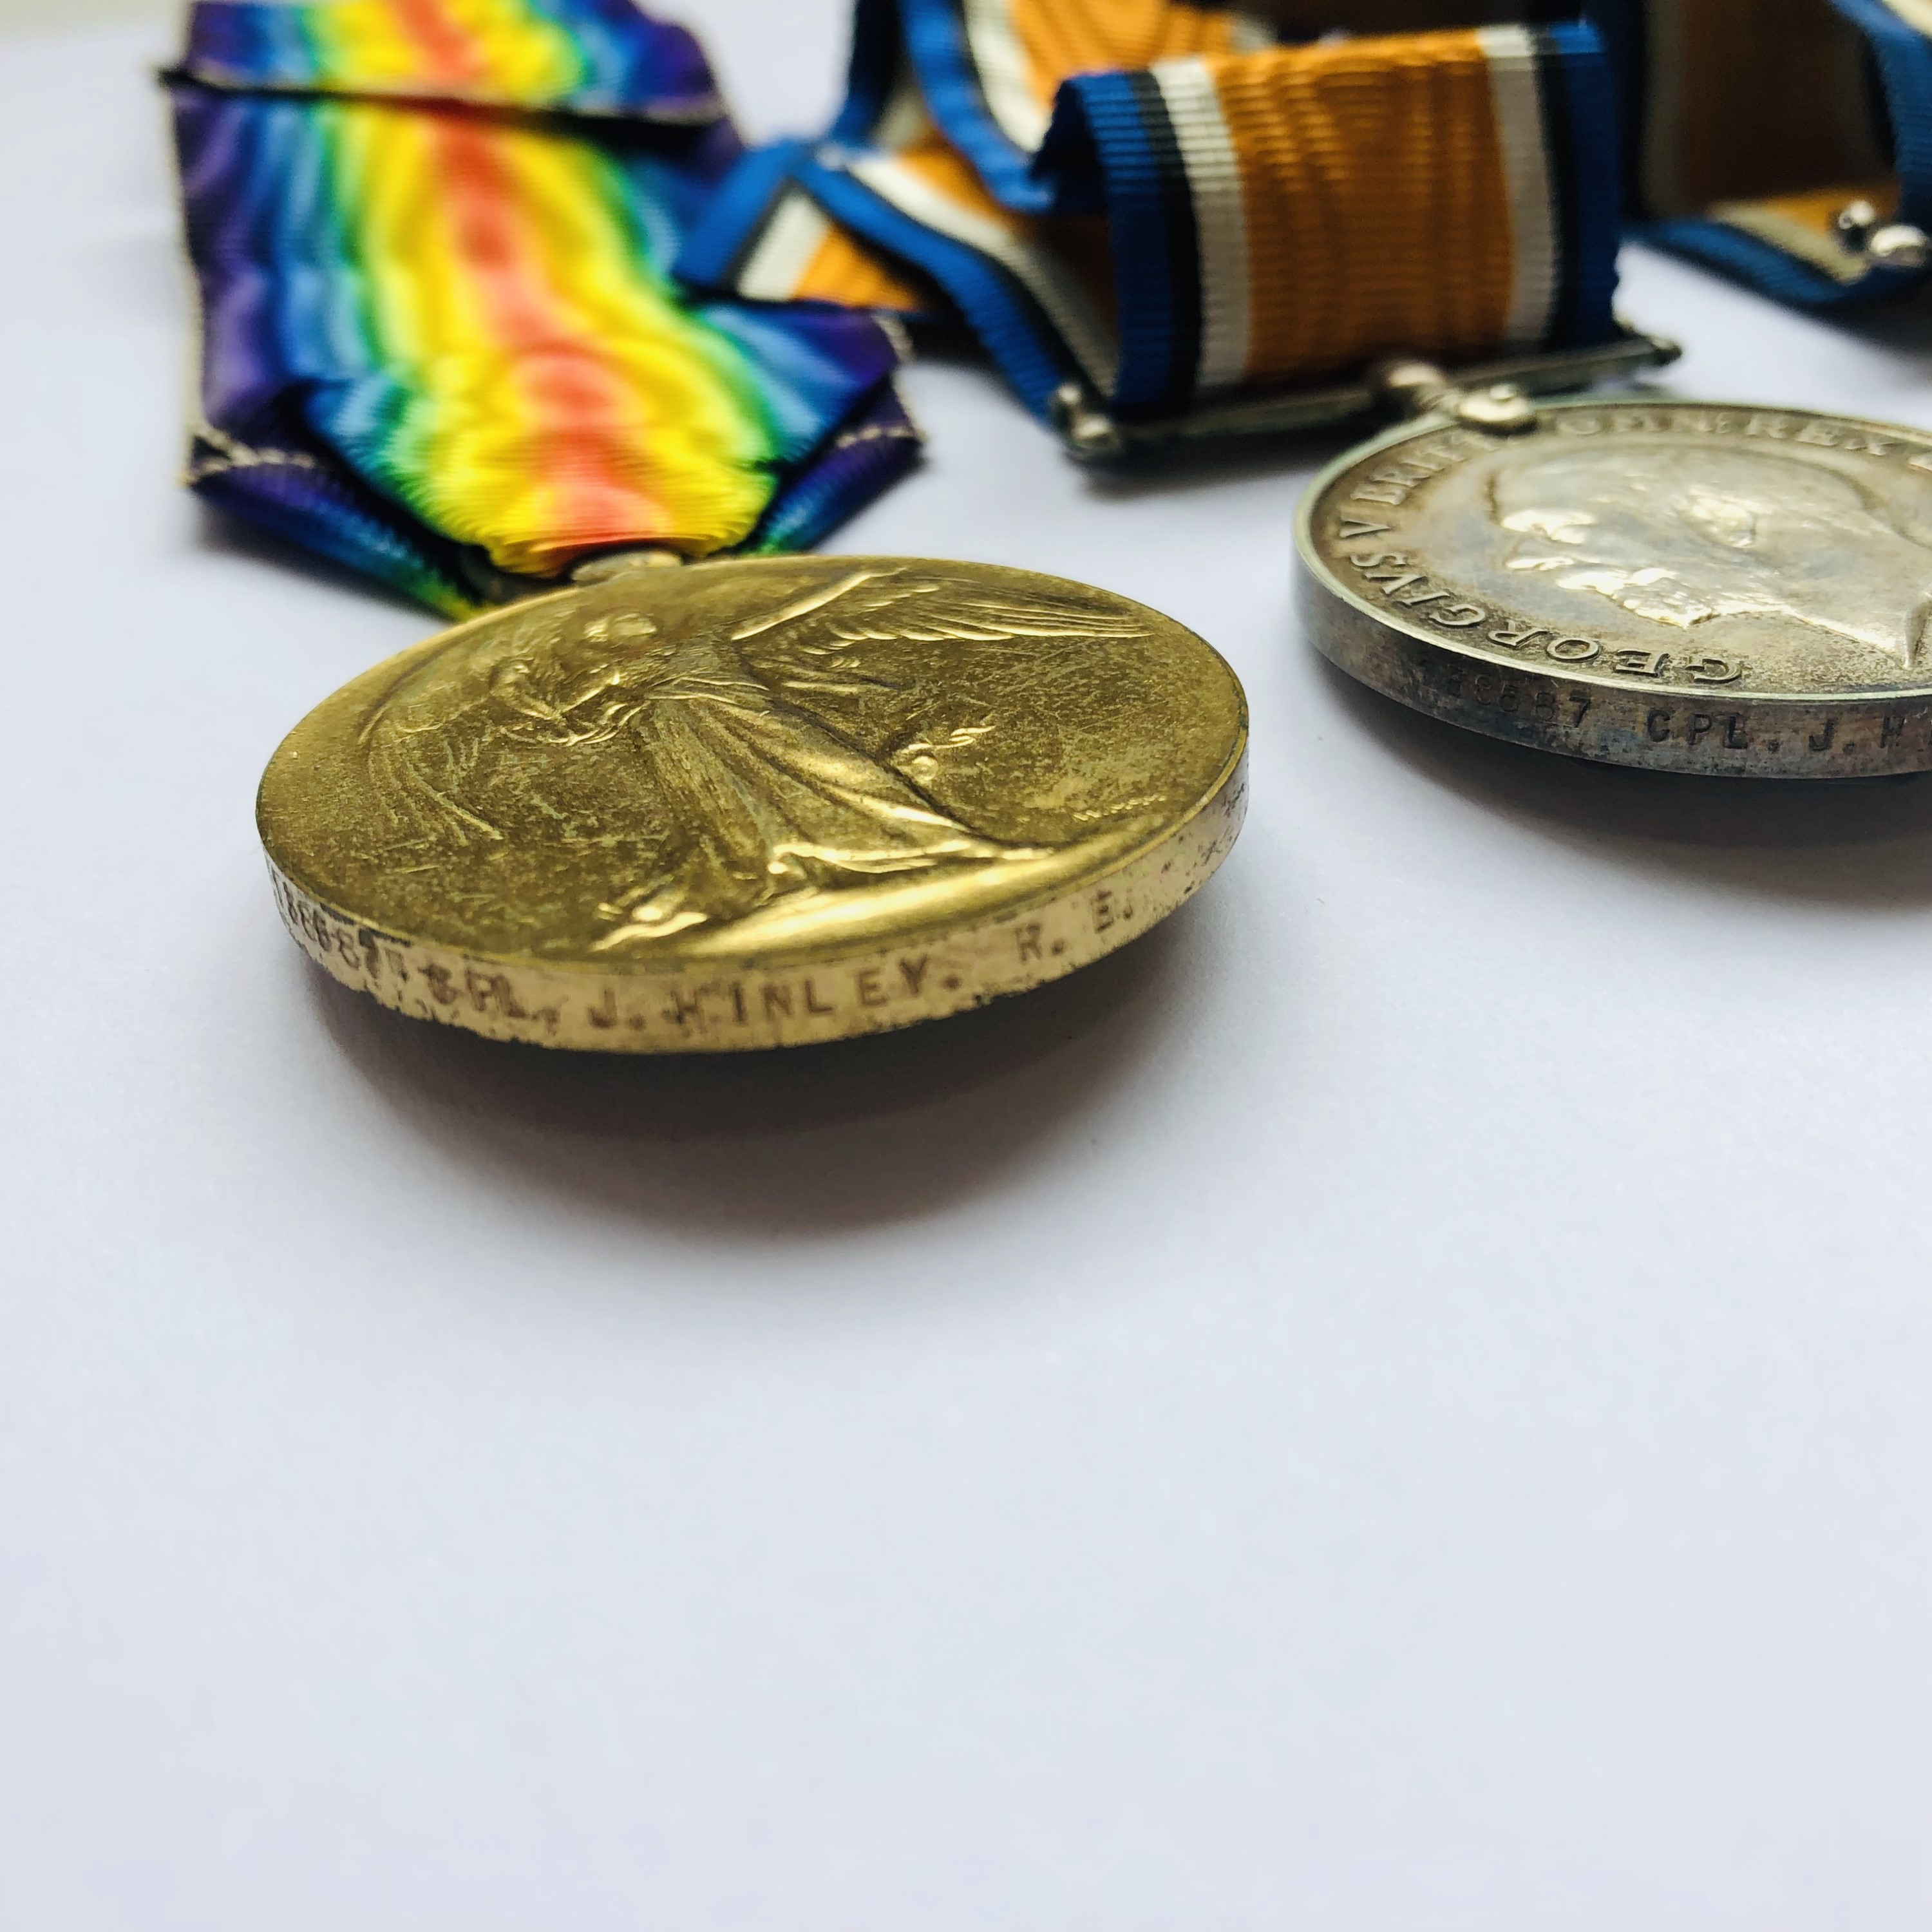 British War and Victory Medals to 138587 Cpl J Hinley, RE, together with a British War Medal to 7216 - Image 3 of 3